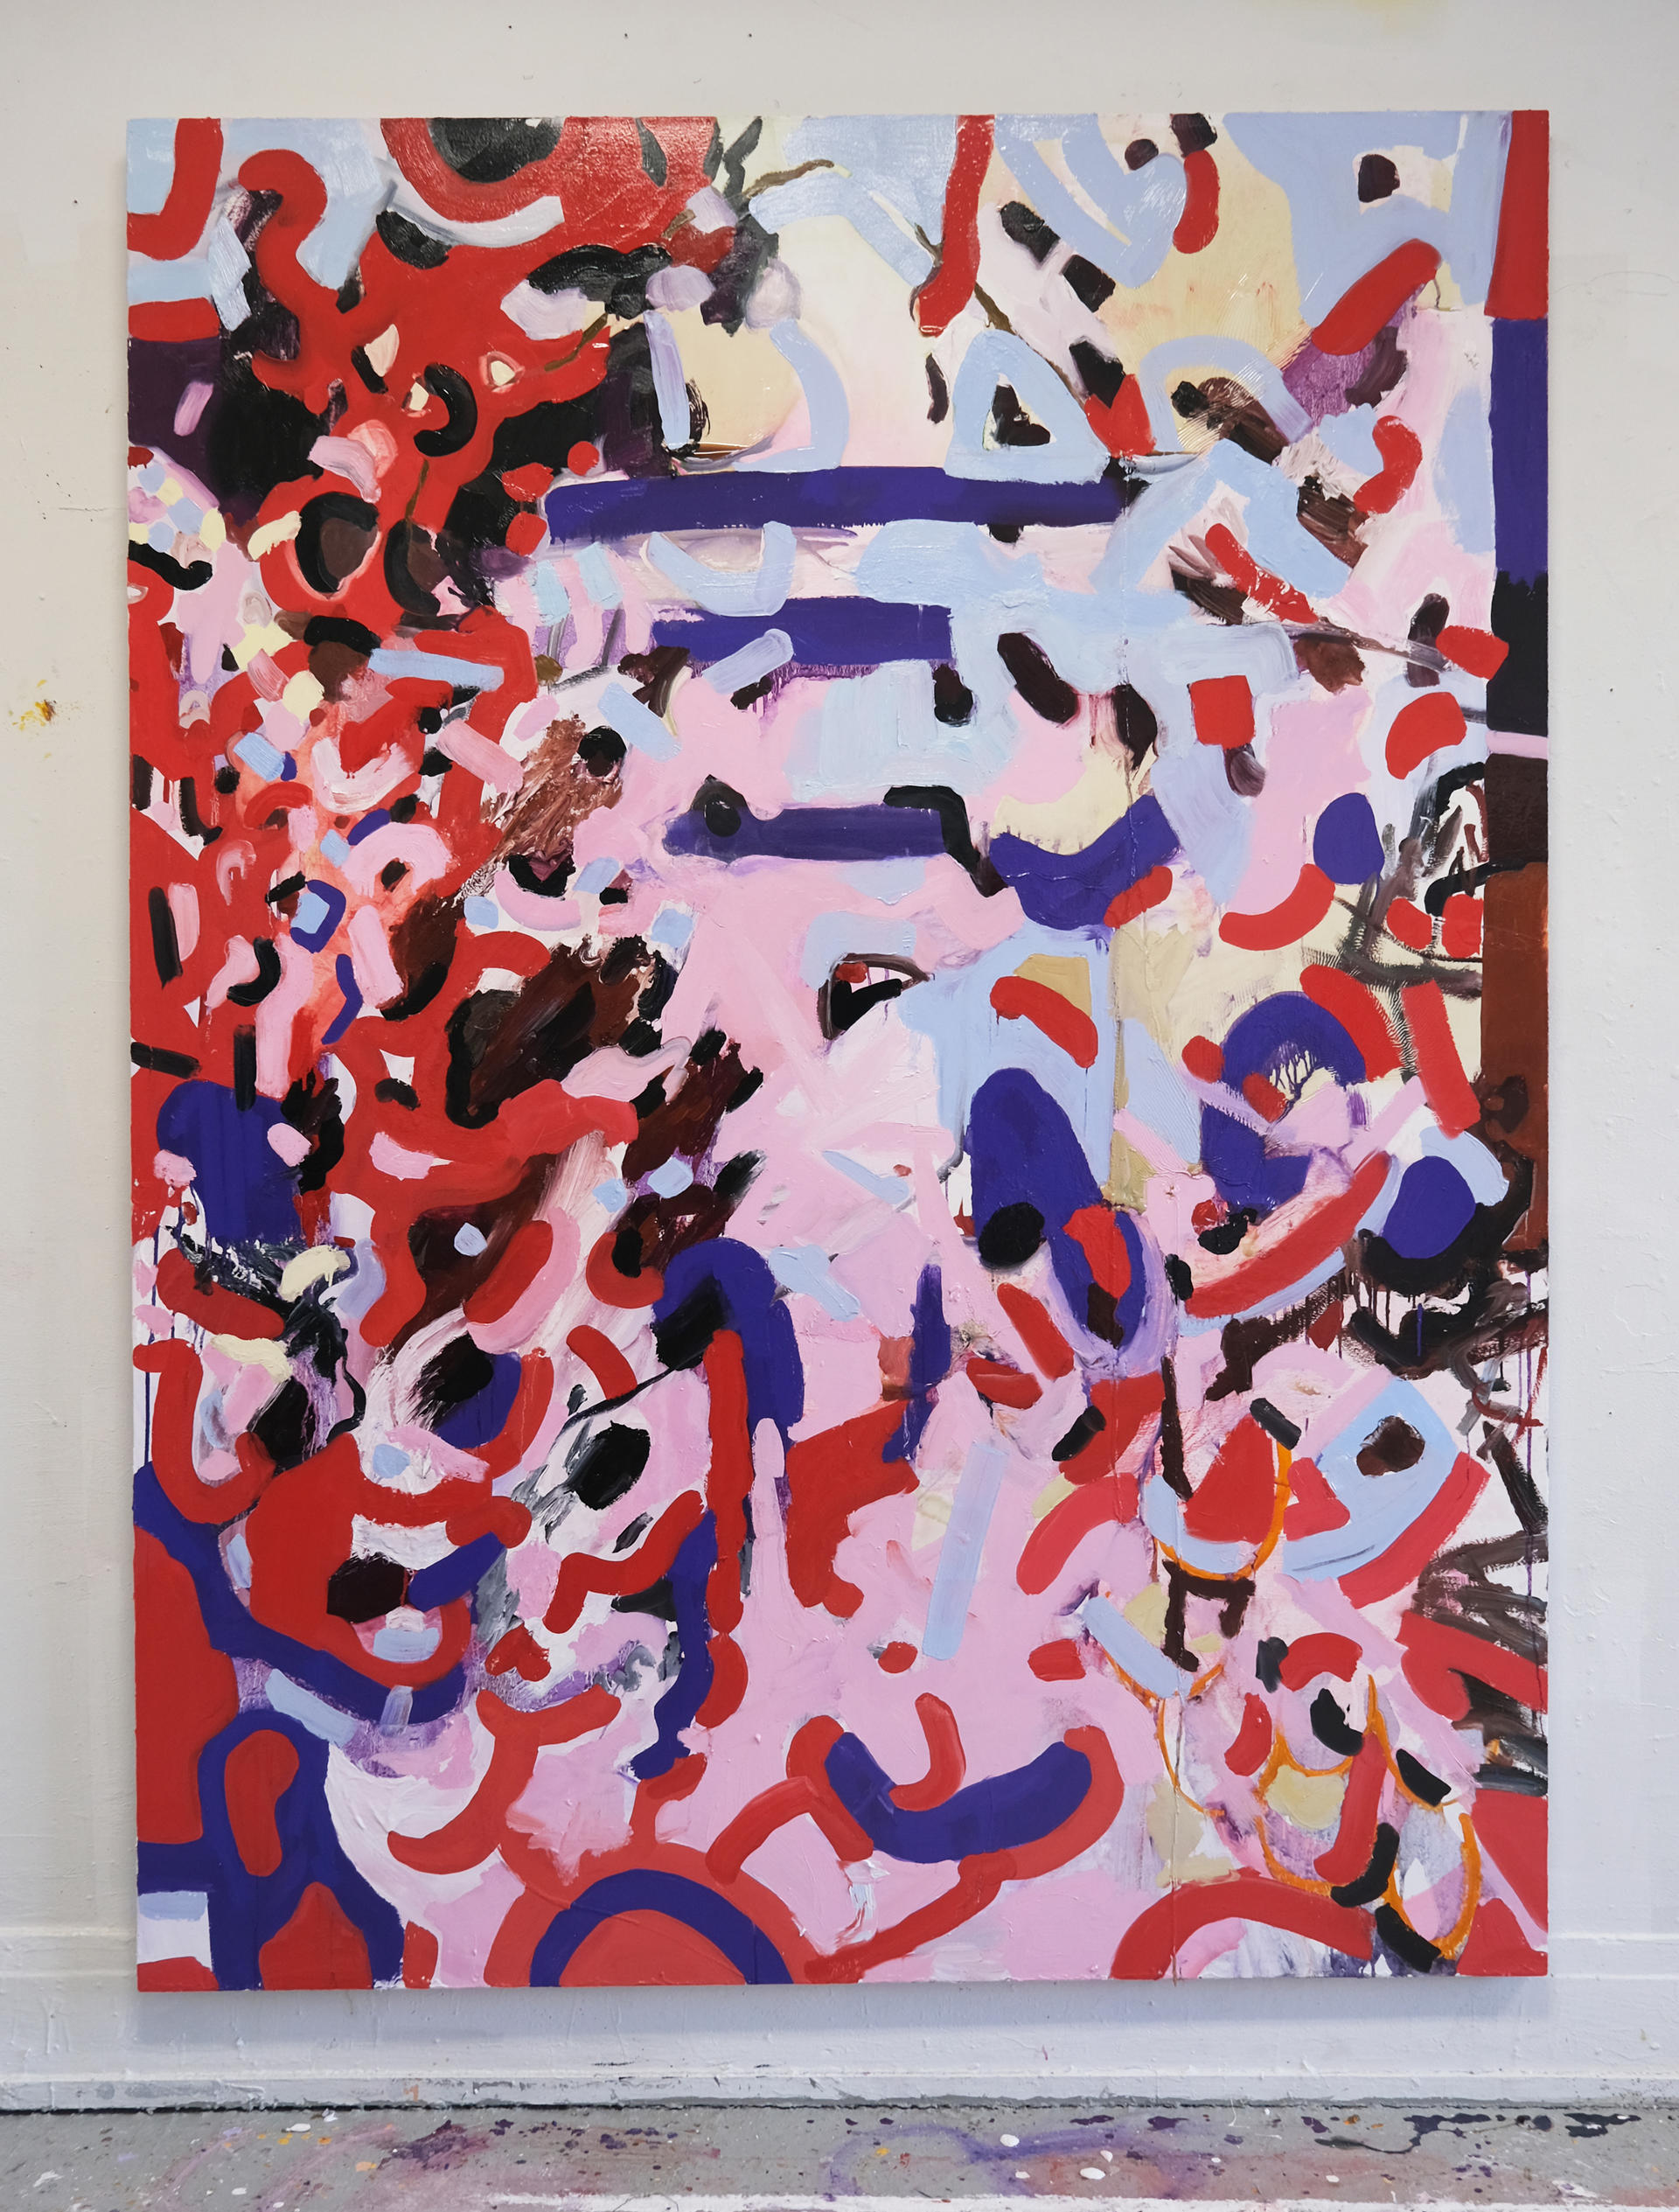 A vertical abstract painting with a red, pink, purple, and blue color pallet. 